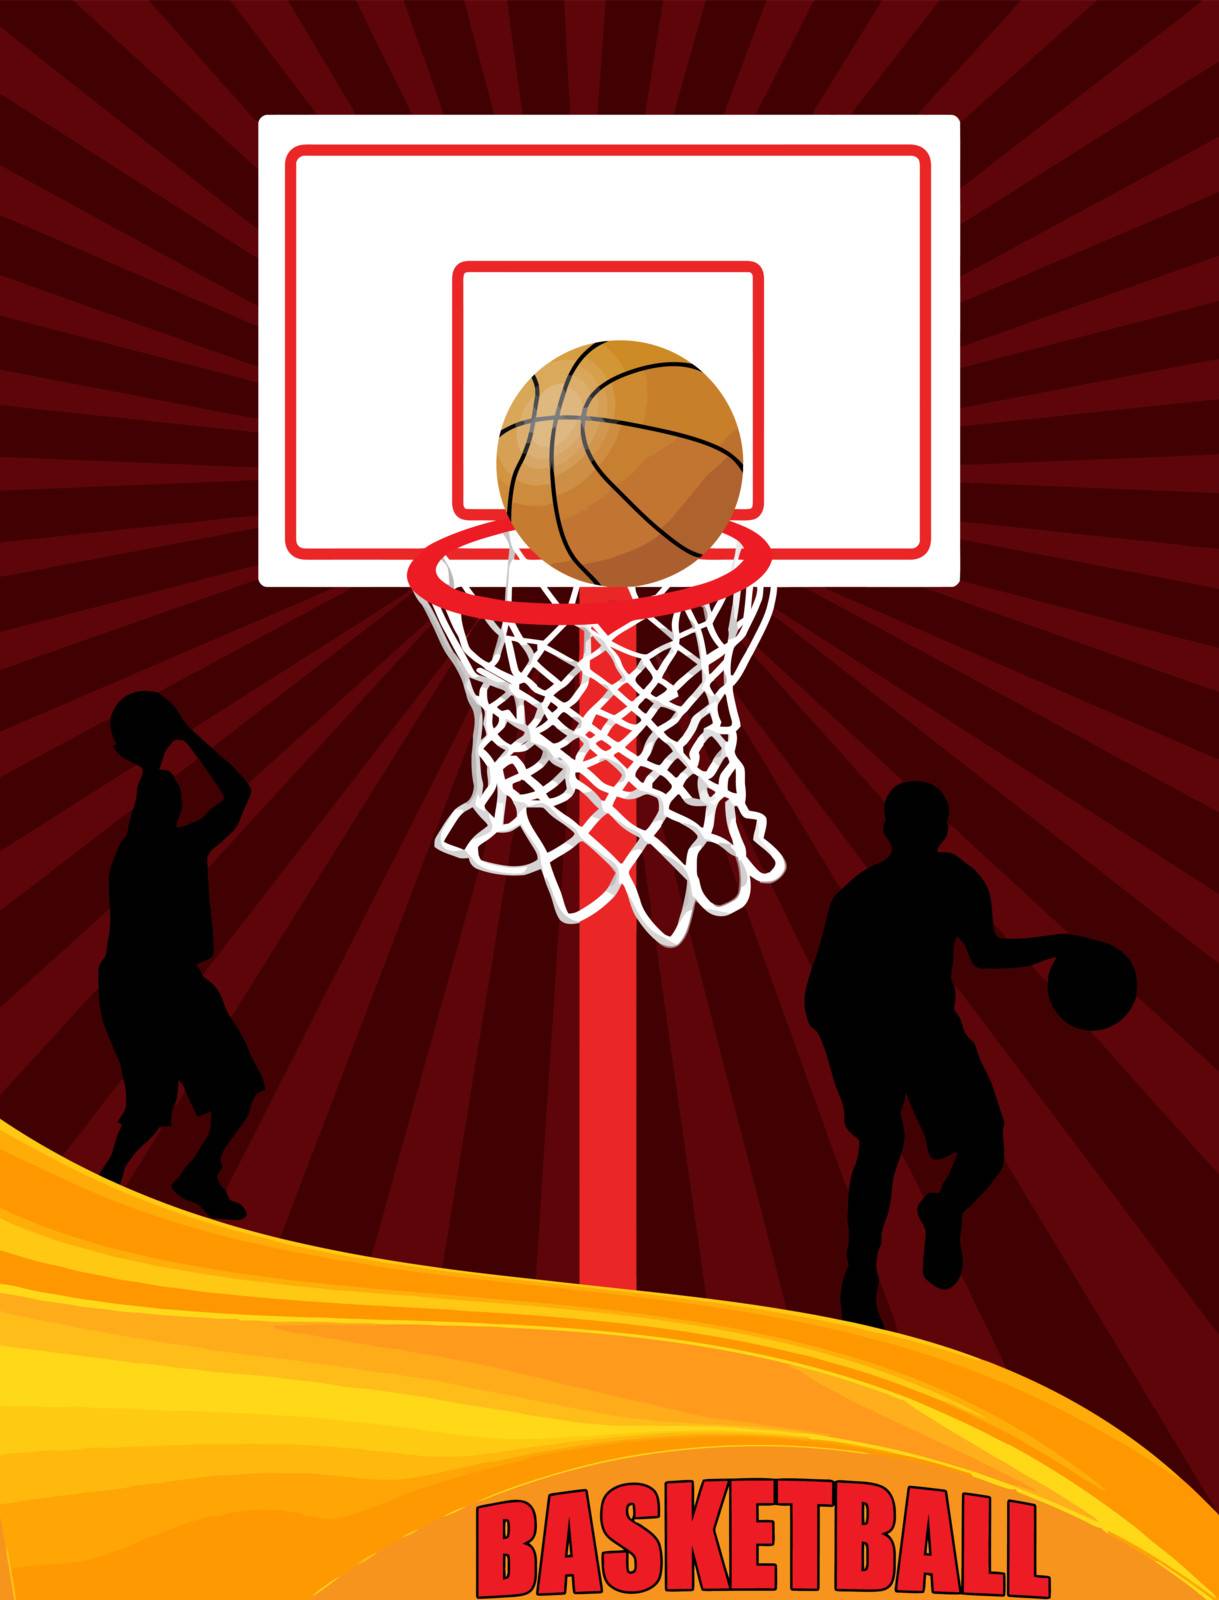 Basketball Advertising poster. Abstract sport background with players and ball, vector illustration